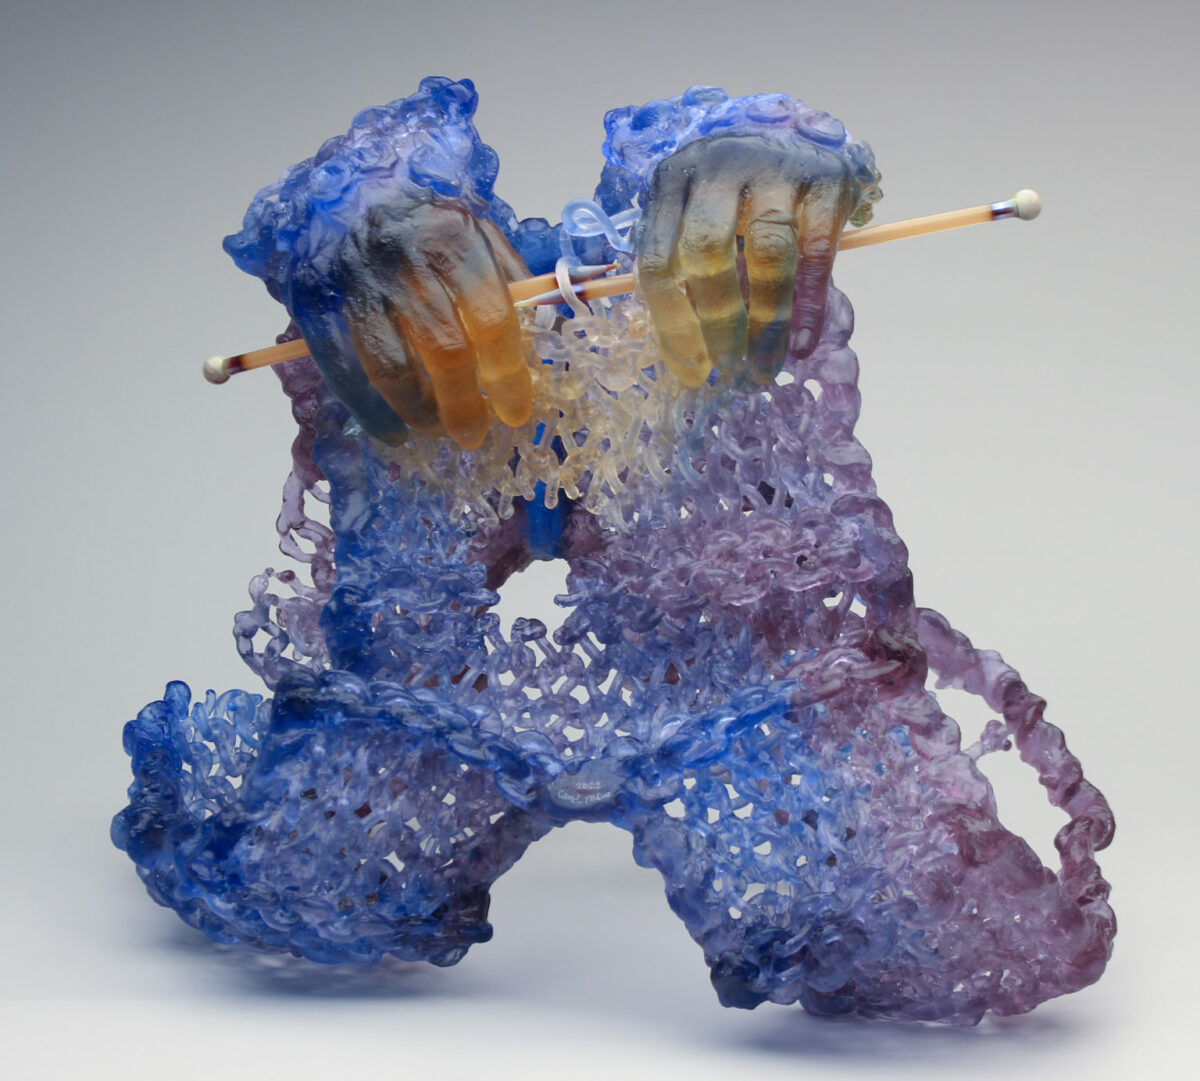 Knitted Glass, Fiber Inspired Sculptures By Carol Milne (1)